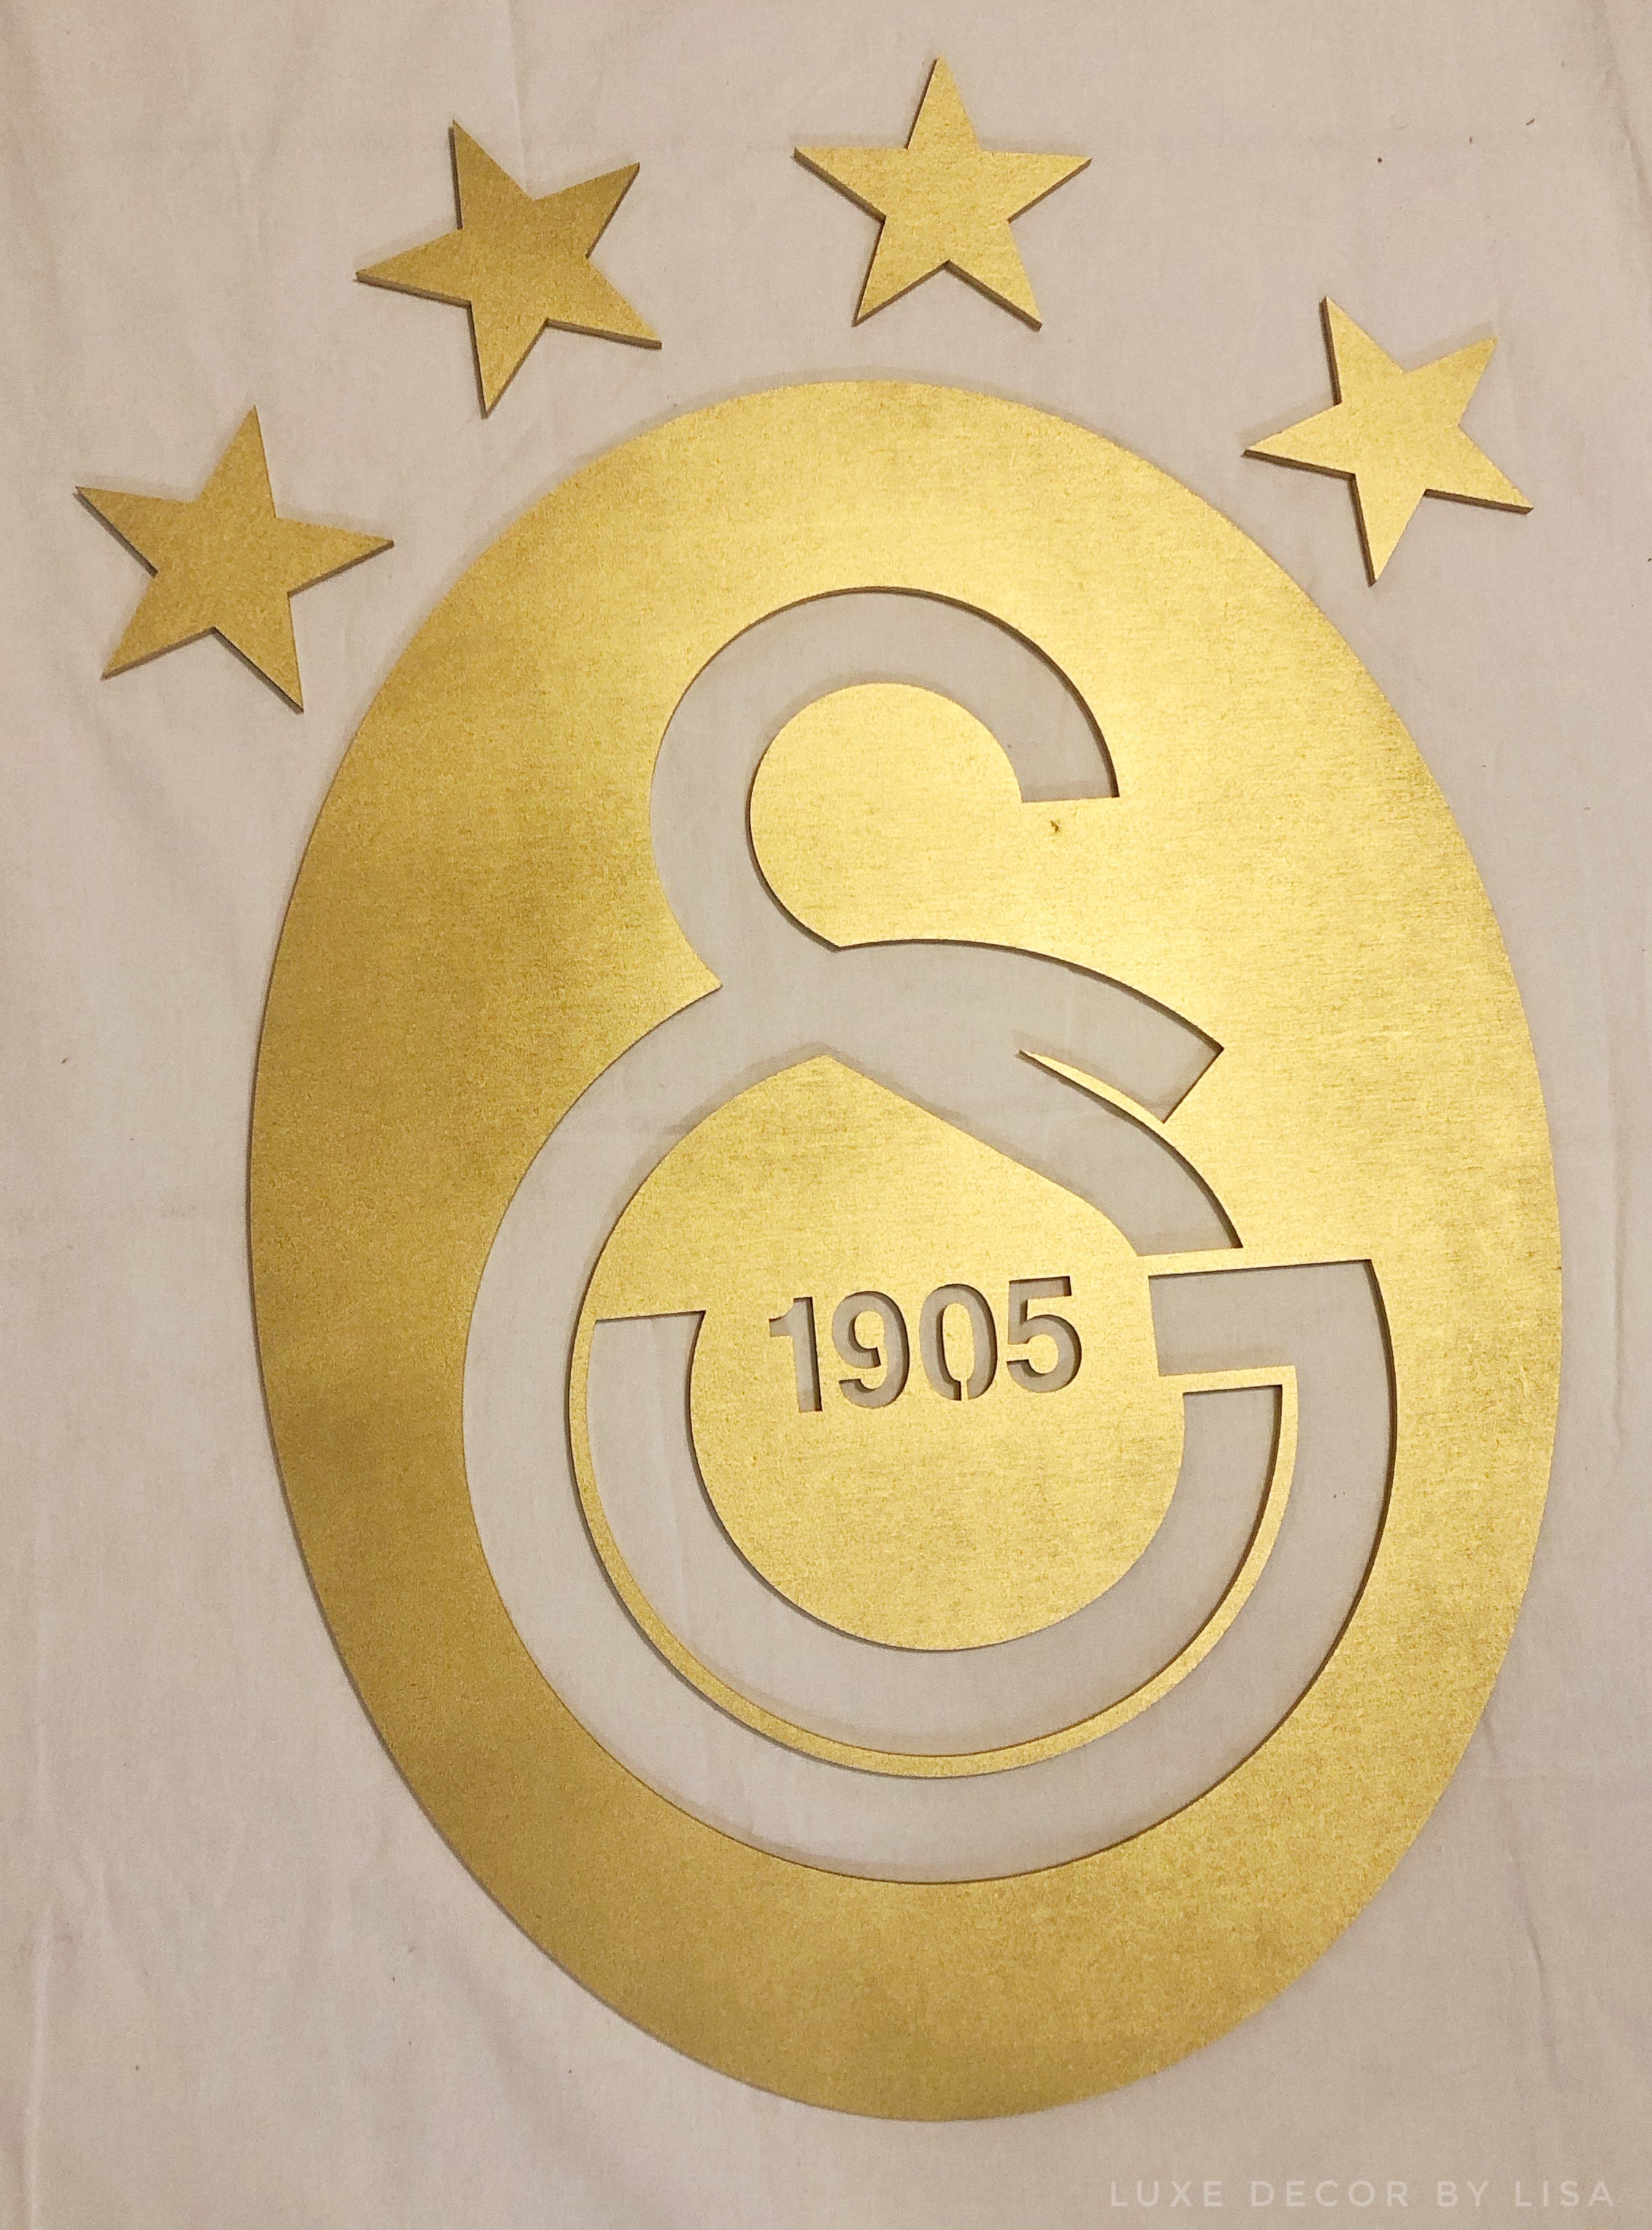 Galatasaray Team Logo Sign – Luxe Decor by Lisa